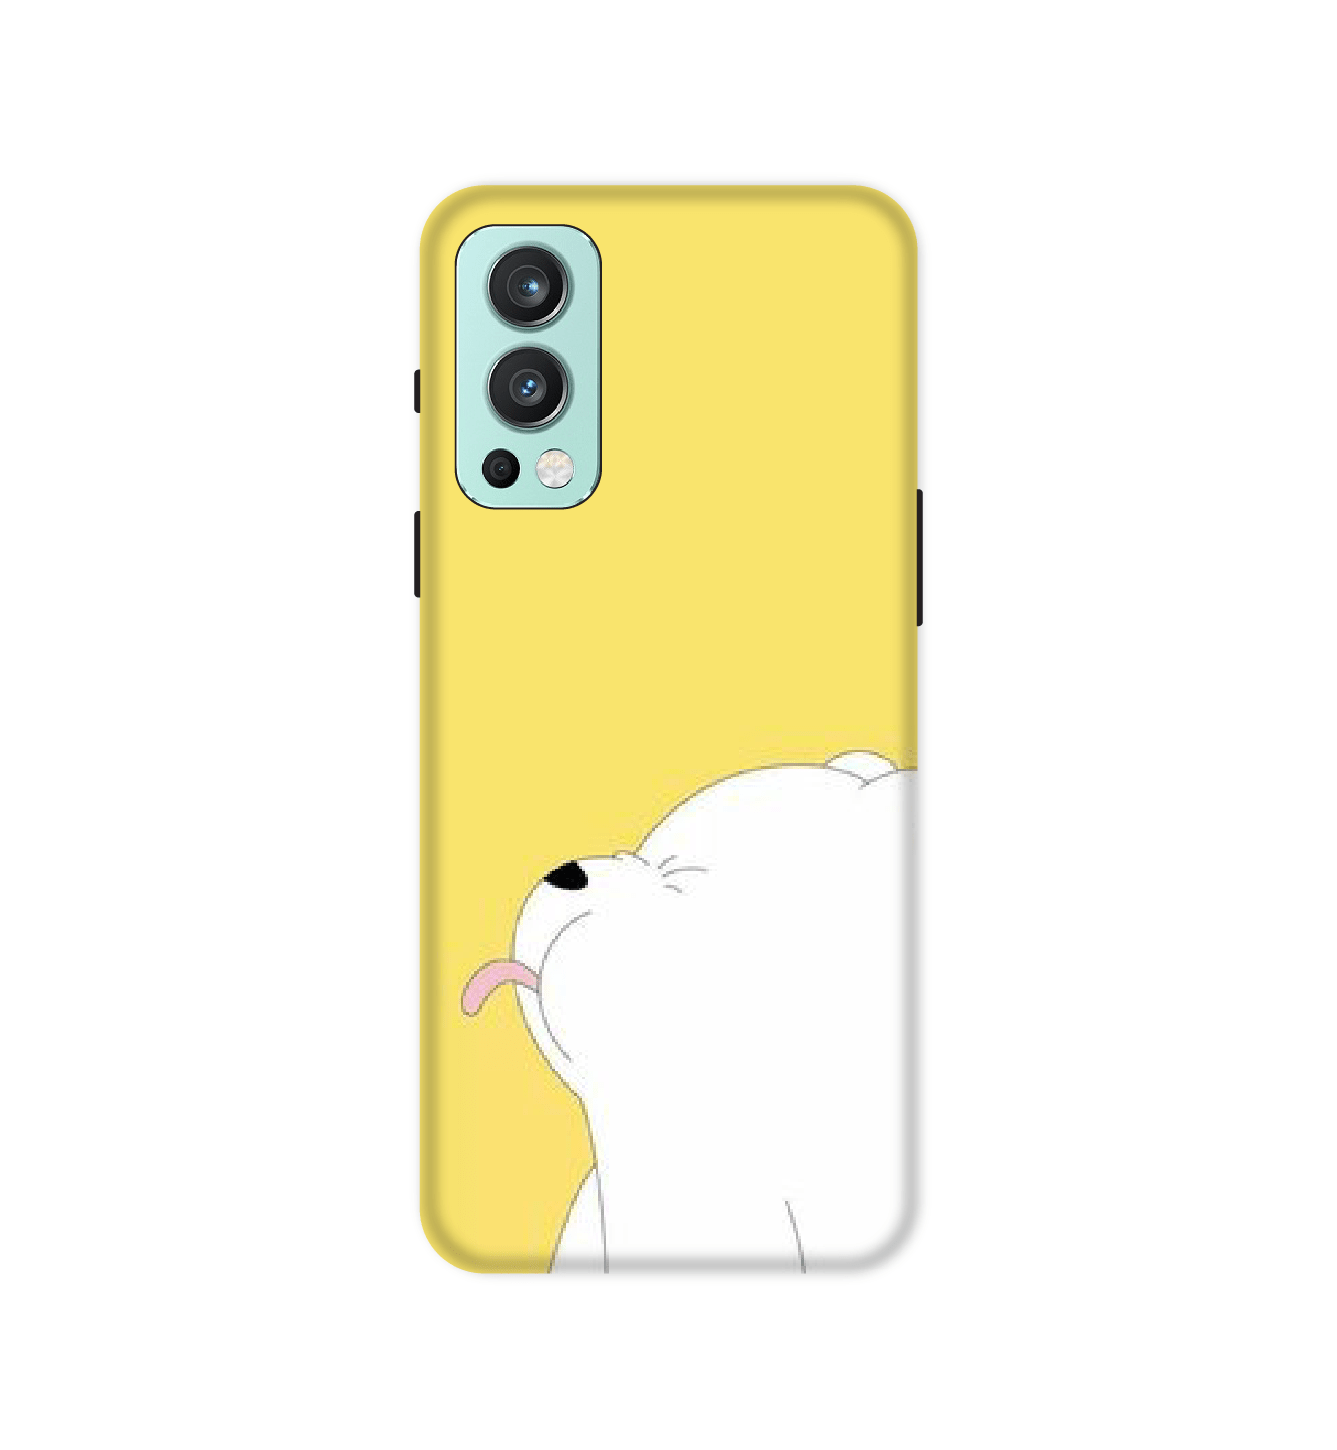 White Teddy  On Yellow Background - Hard Cases For OnePlus Models